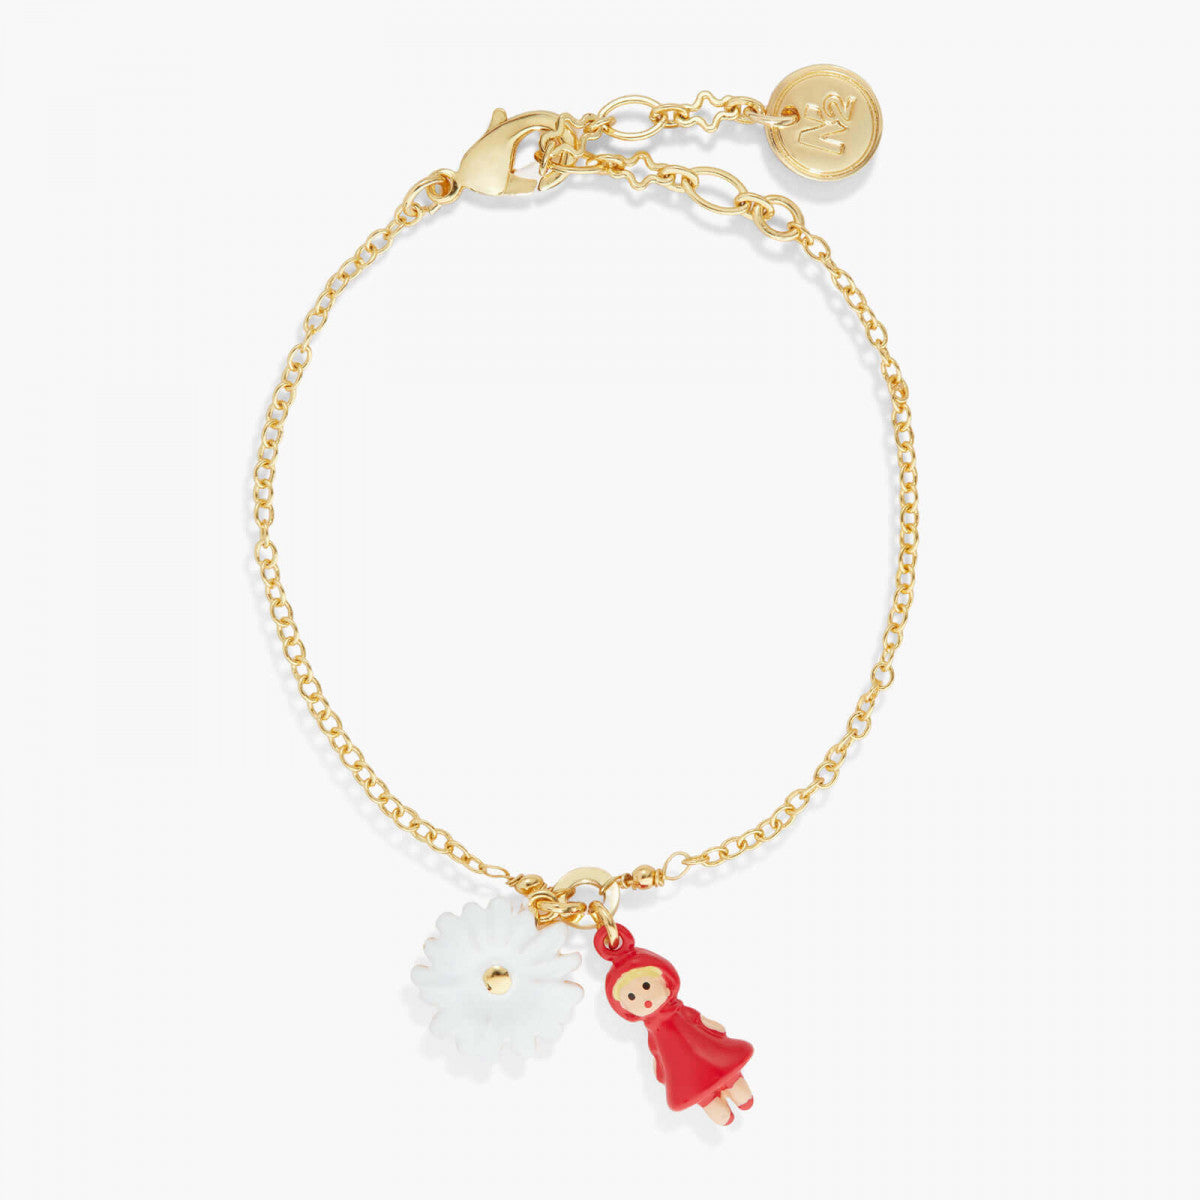 DAISY AND LITTLE RED RIDING HOOD CHARM BRACELET